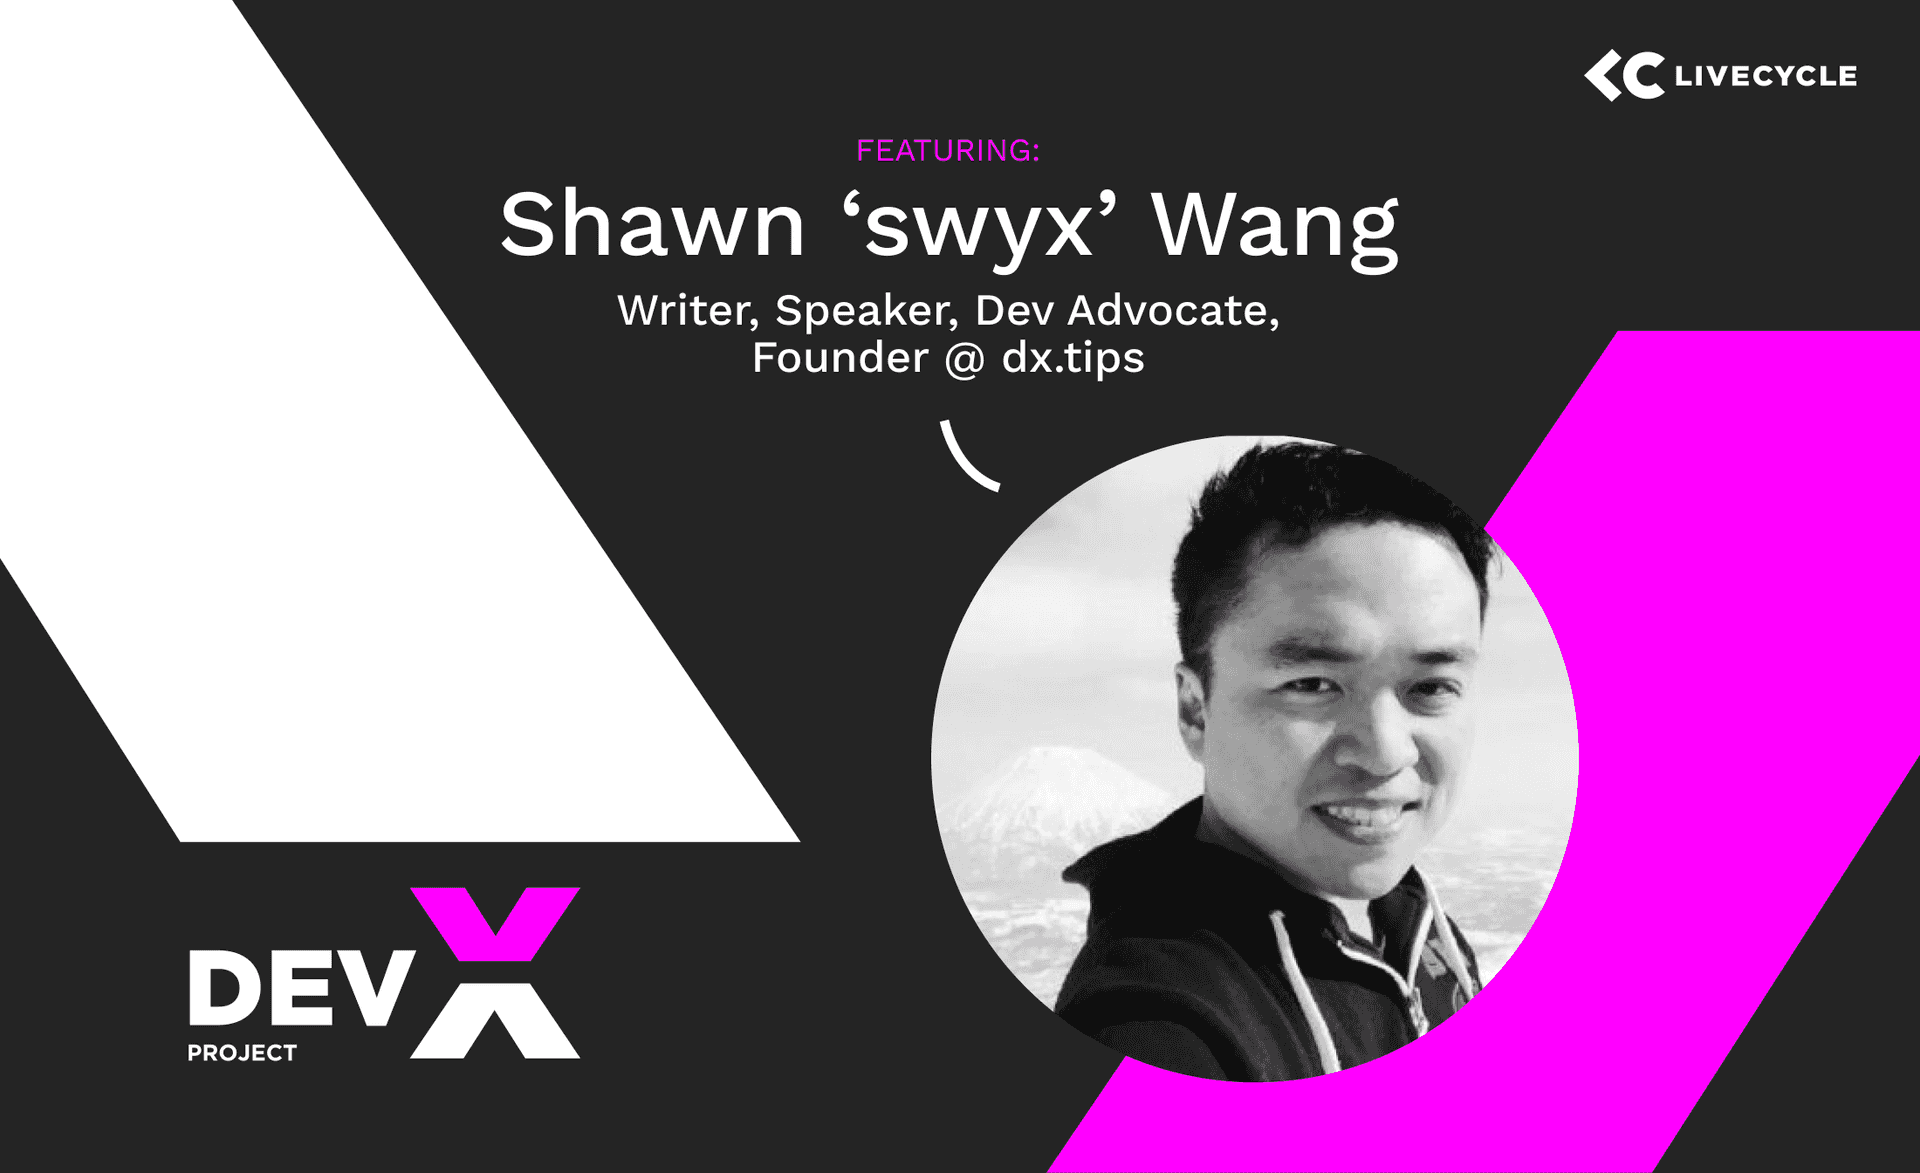 The Dev-X Project: Featuring Shawn 'swyx' Wang